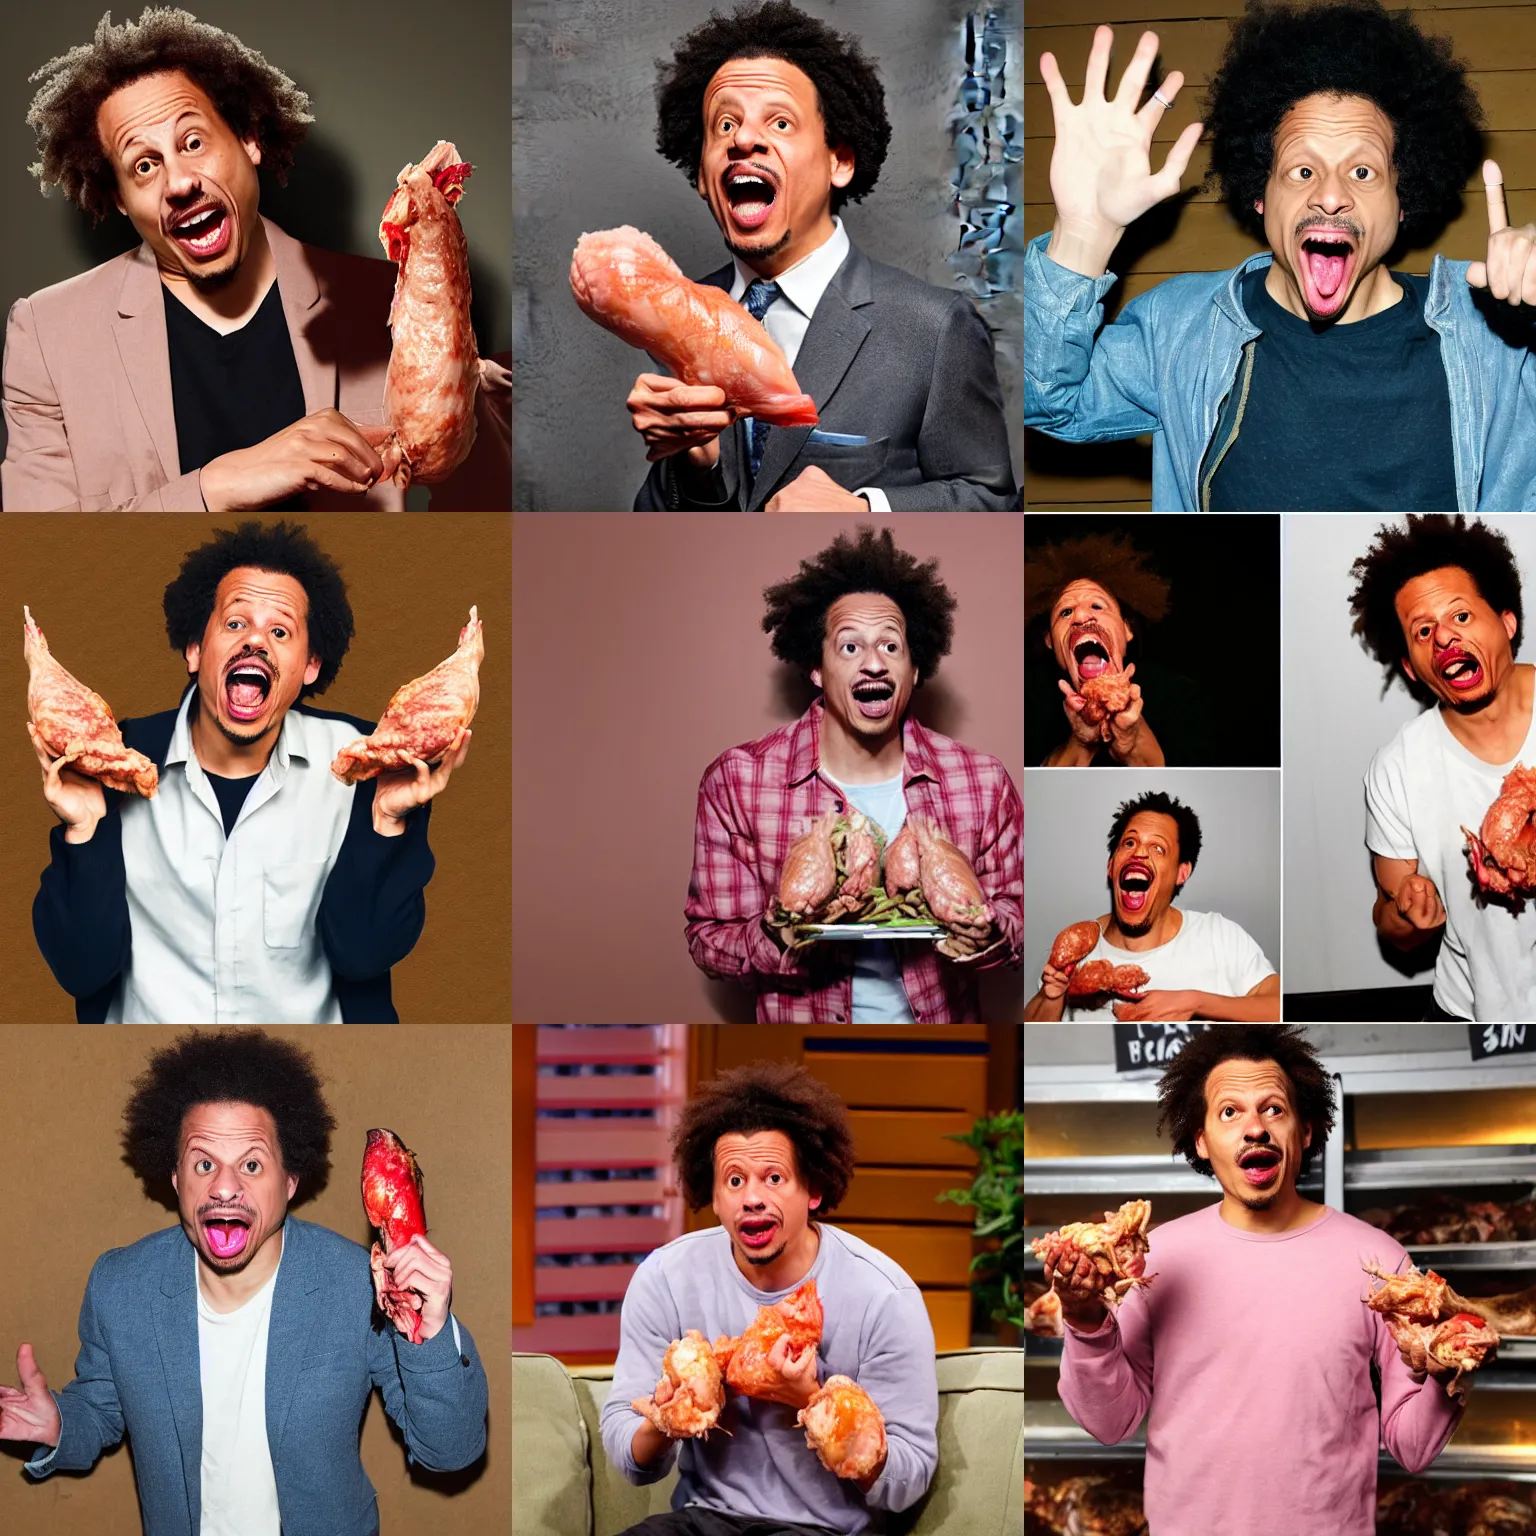 Prompt: eric andre with raw chicken on his hands, screaming